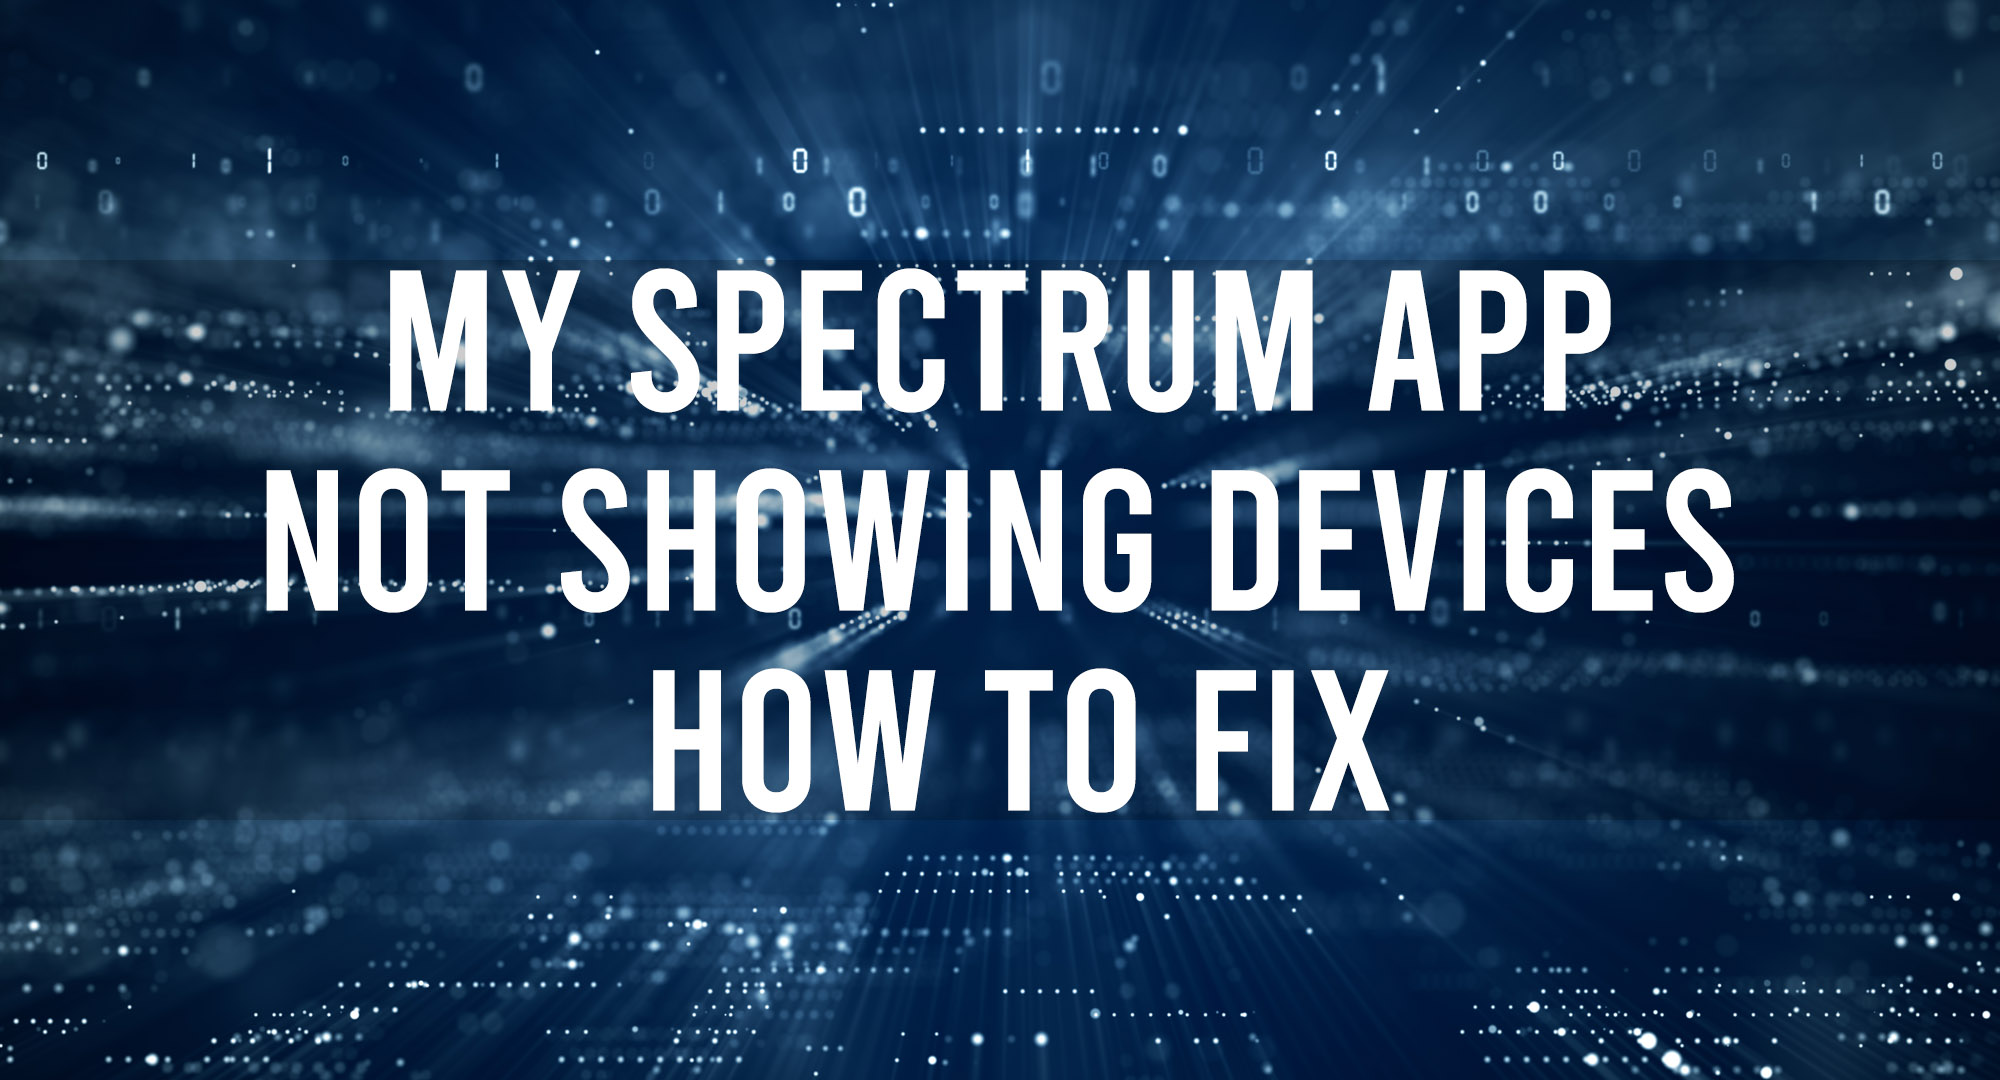 My Spectrum App Not Showing Devices - How to Fix